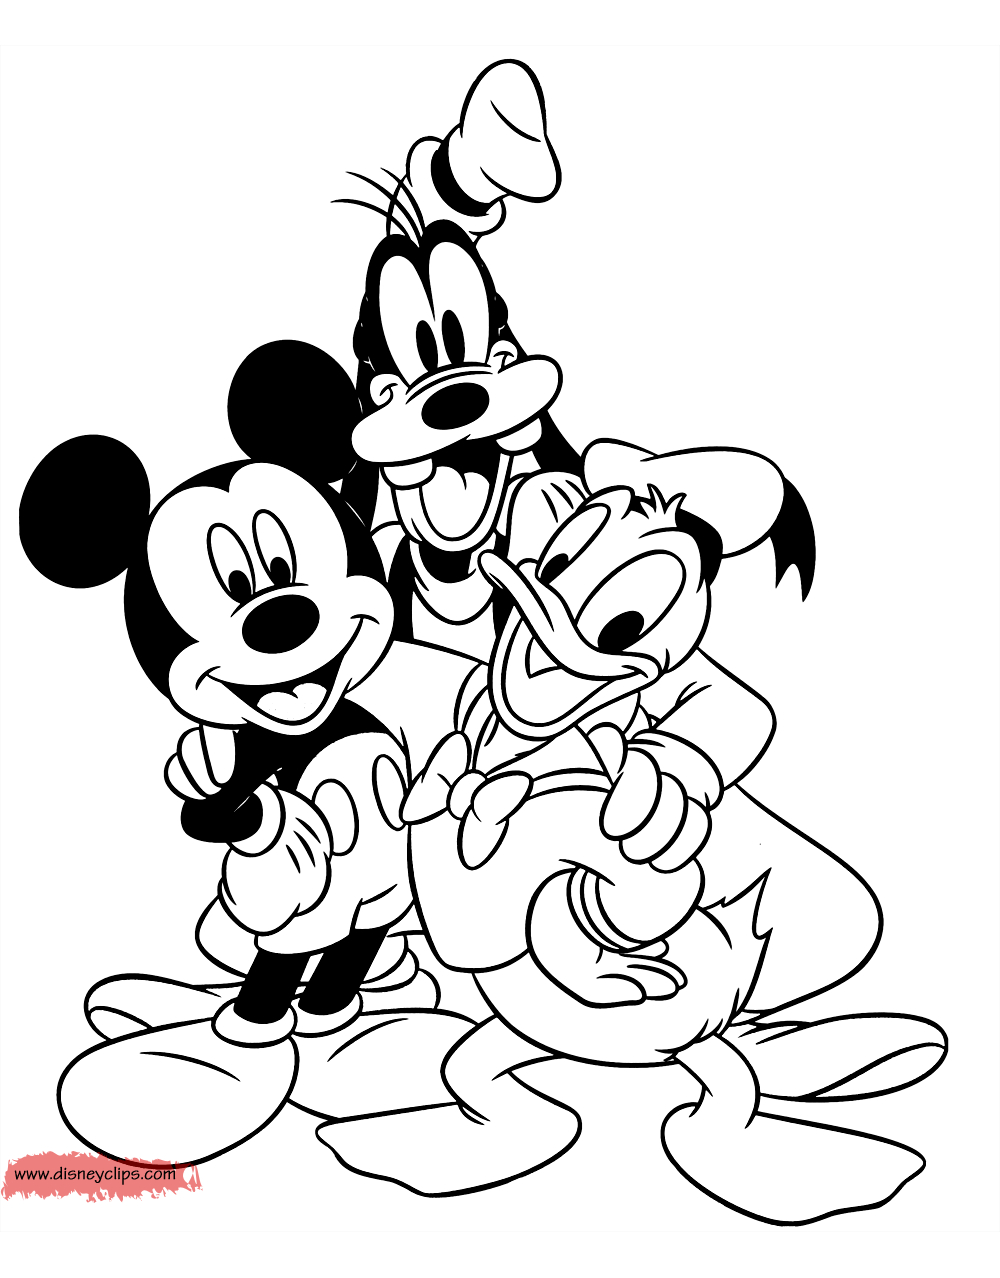 Mickey And Minnie Coloring Pages To Print Coloring Pages Mickey Minnie Mouse Coloring Pages Clubhouse